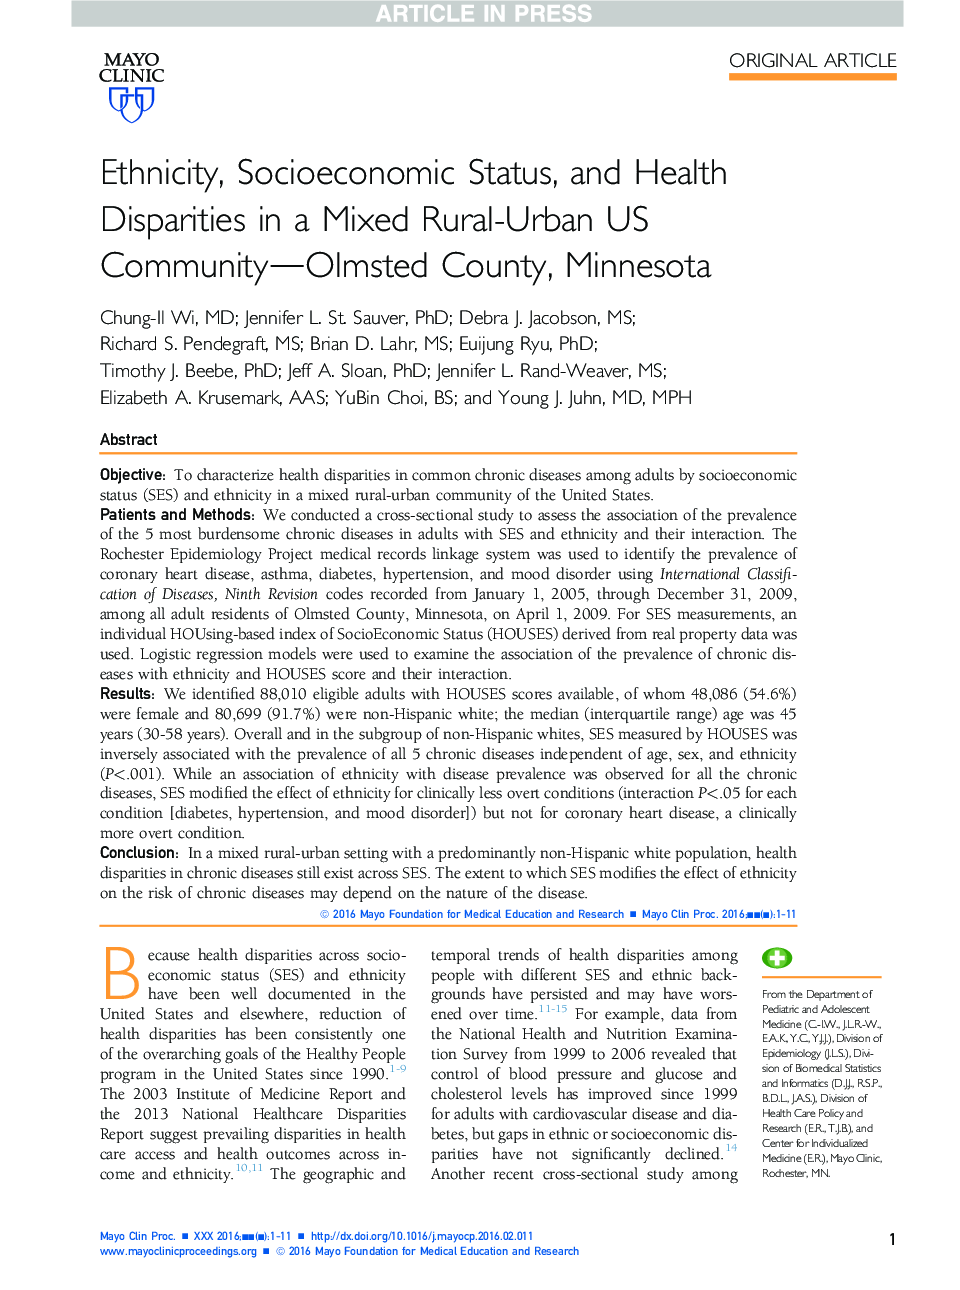 Ethnicity, Socioeconomic Status, and Health Disparities in a Mixed Rural-Urban US Community-Olmsted County, Minnesota